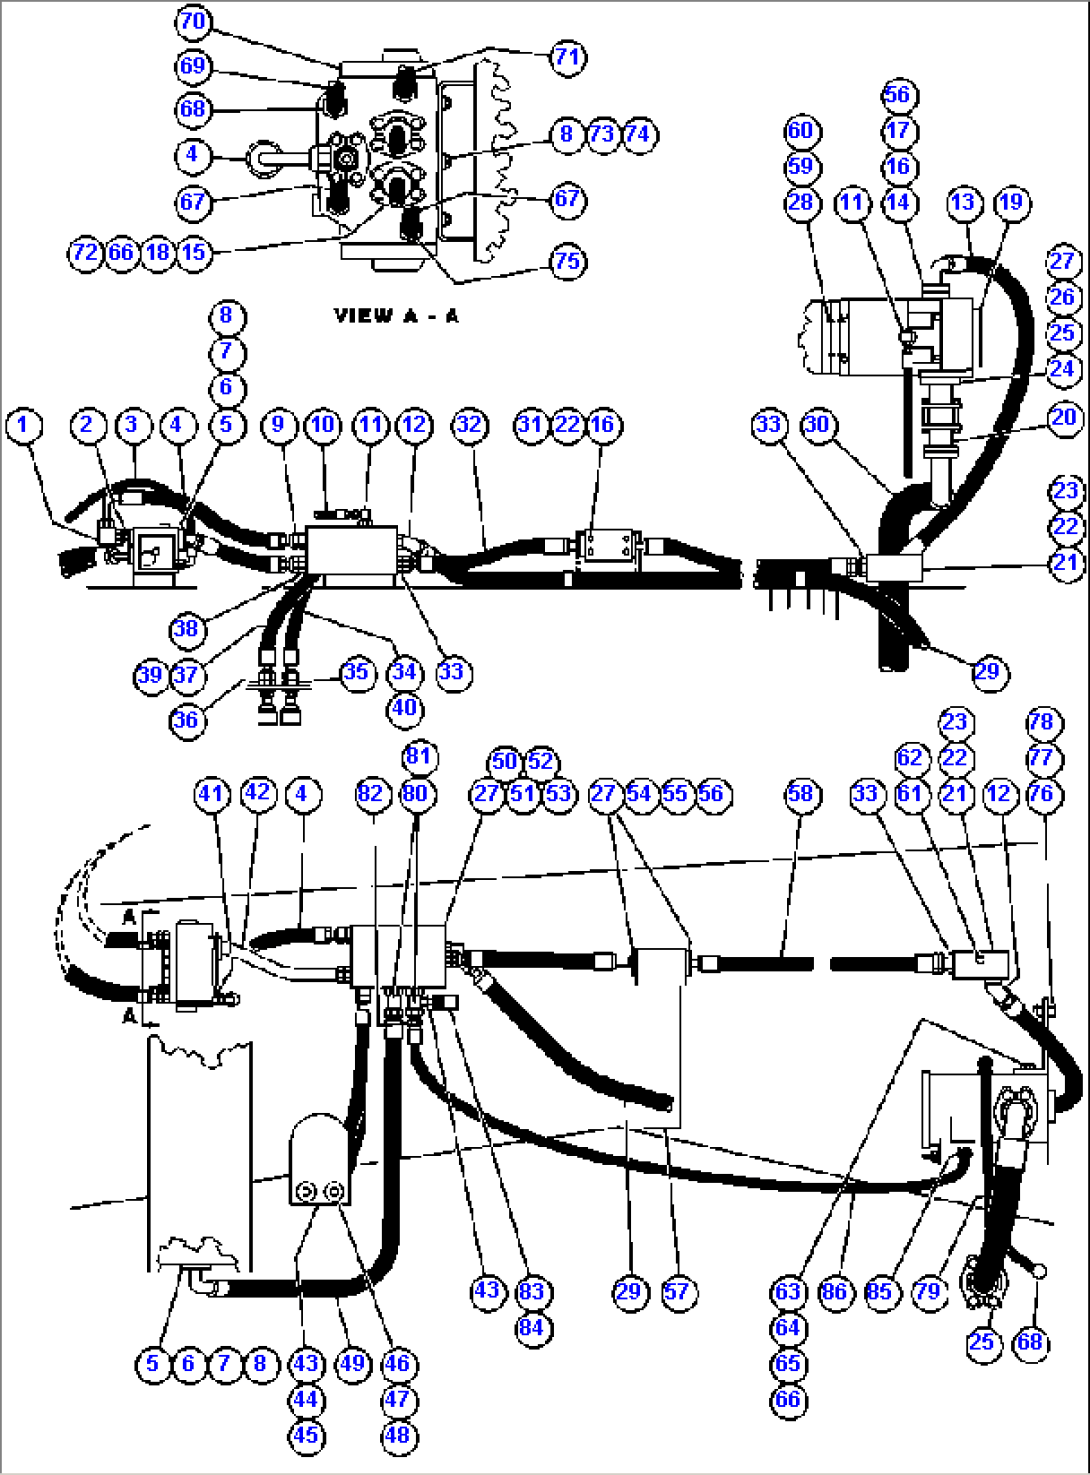 STEERING SYSTEM PIPING - 1